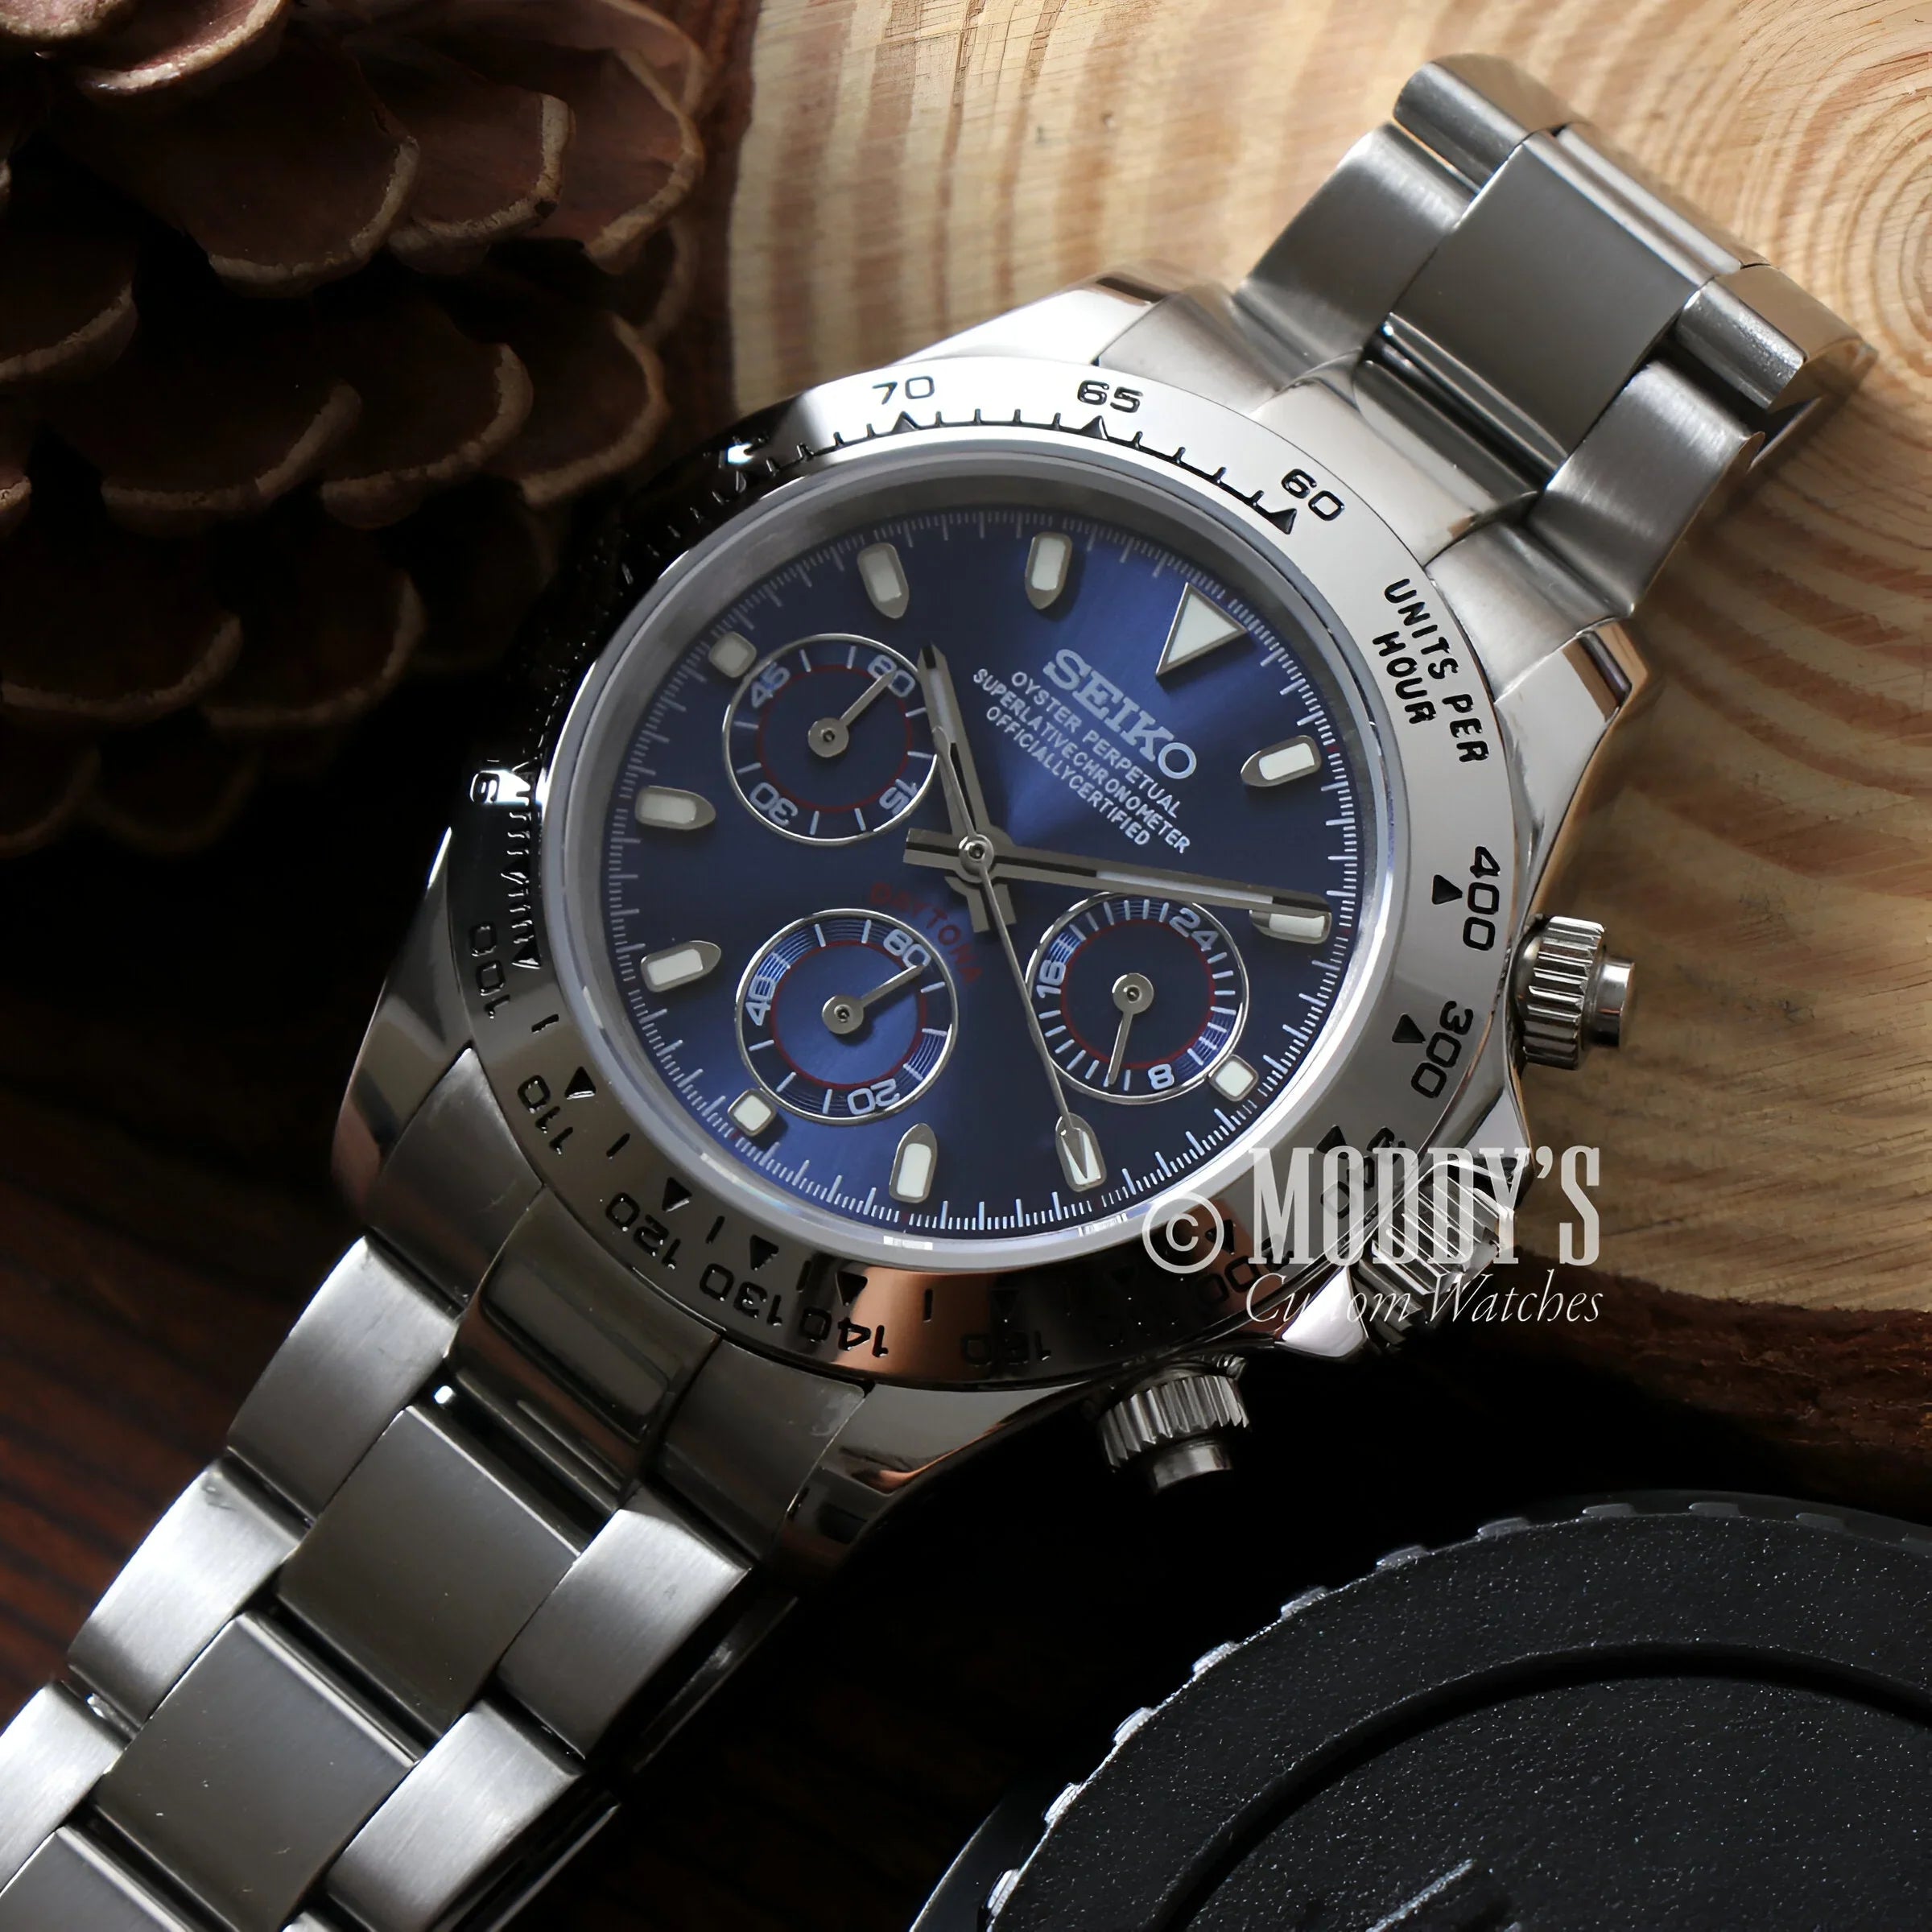 Seitona Silver - Blue Watch With Blue Dial On Wooden Table, Featuring Vk63 Hybrid Movement